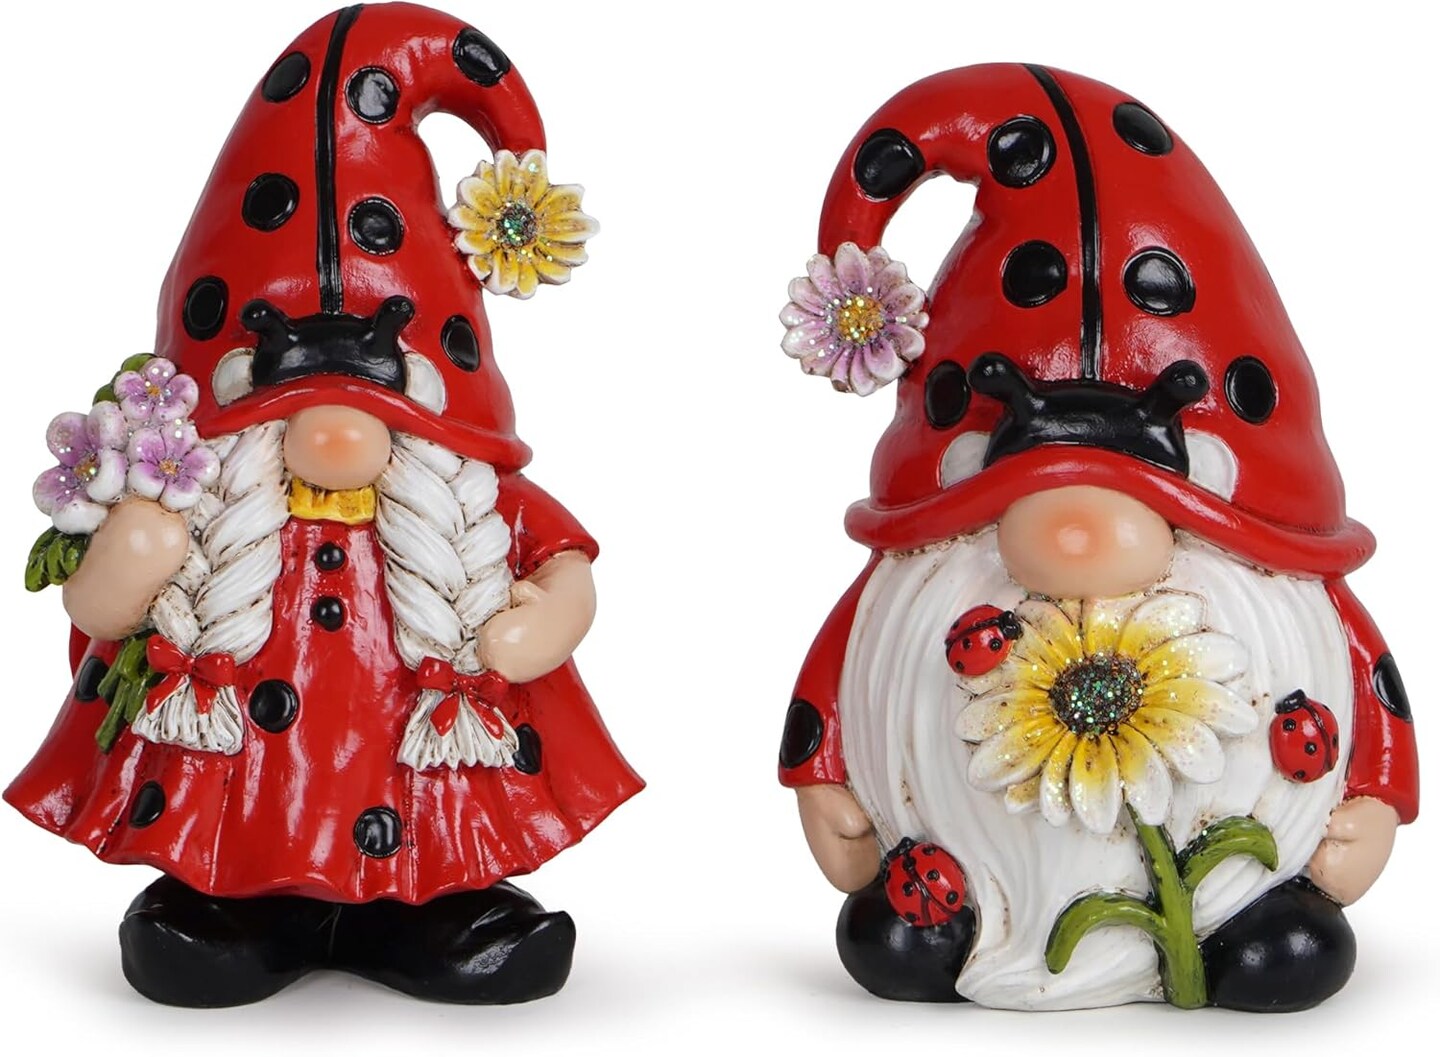 Ladybug Themed Sculpture: 2 pieces; Spring and Summer Decorations; Symbol of Luck; Indoor Home Decor; Ladybug Gnomes Statue